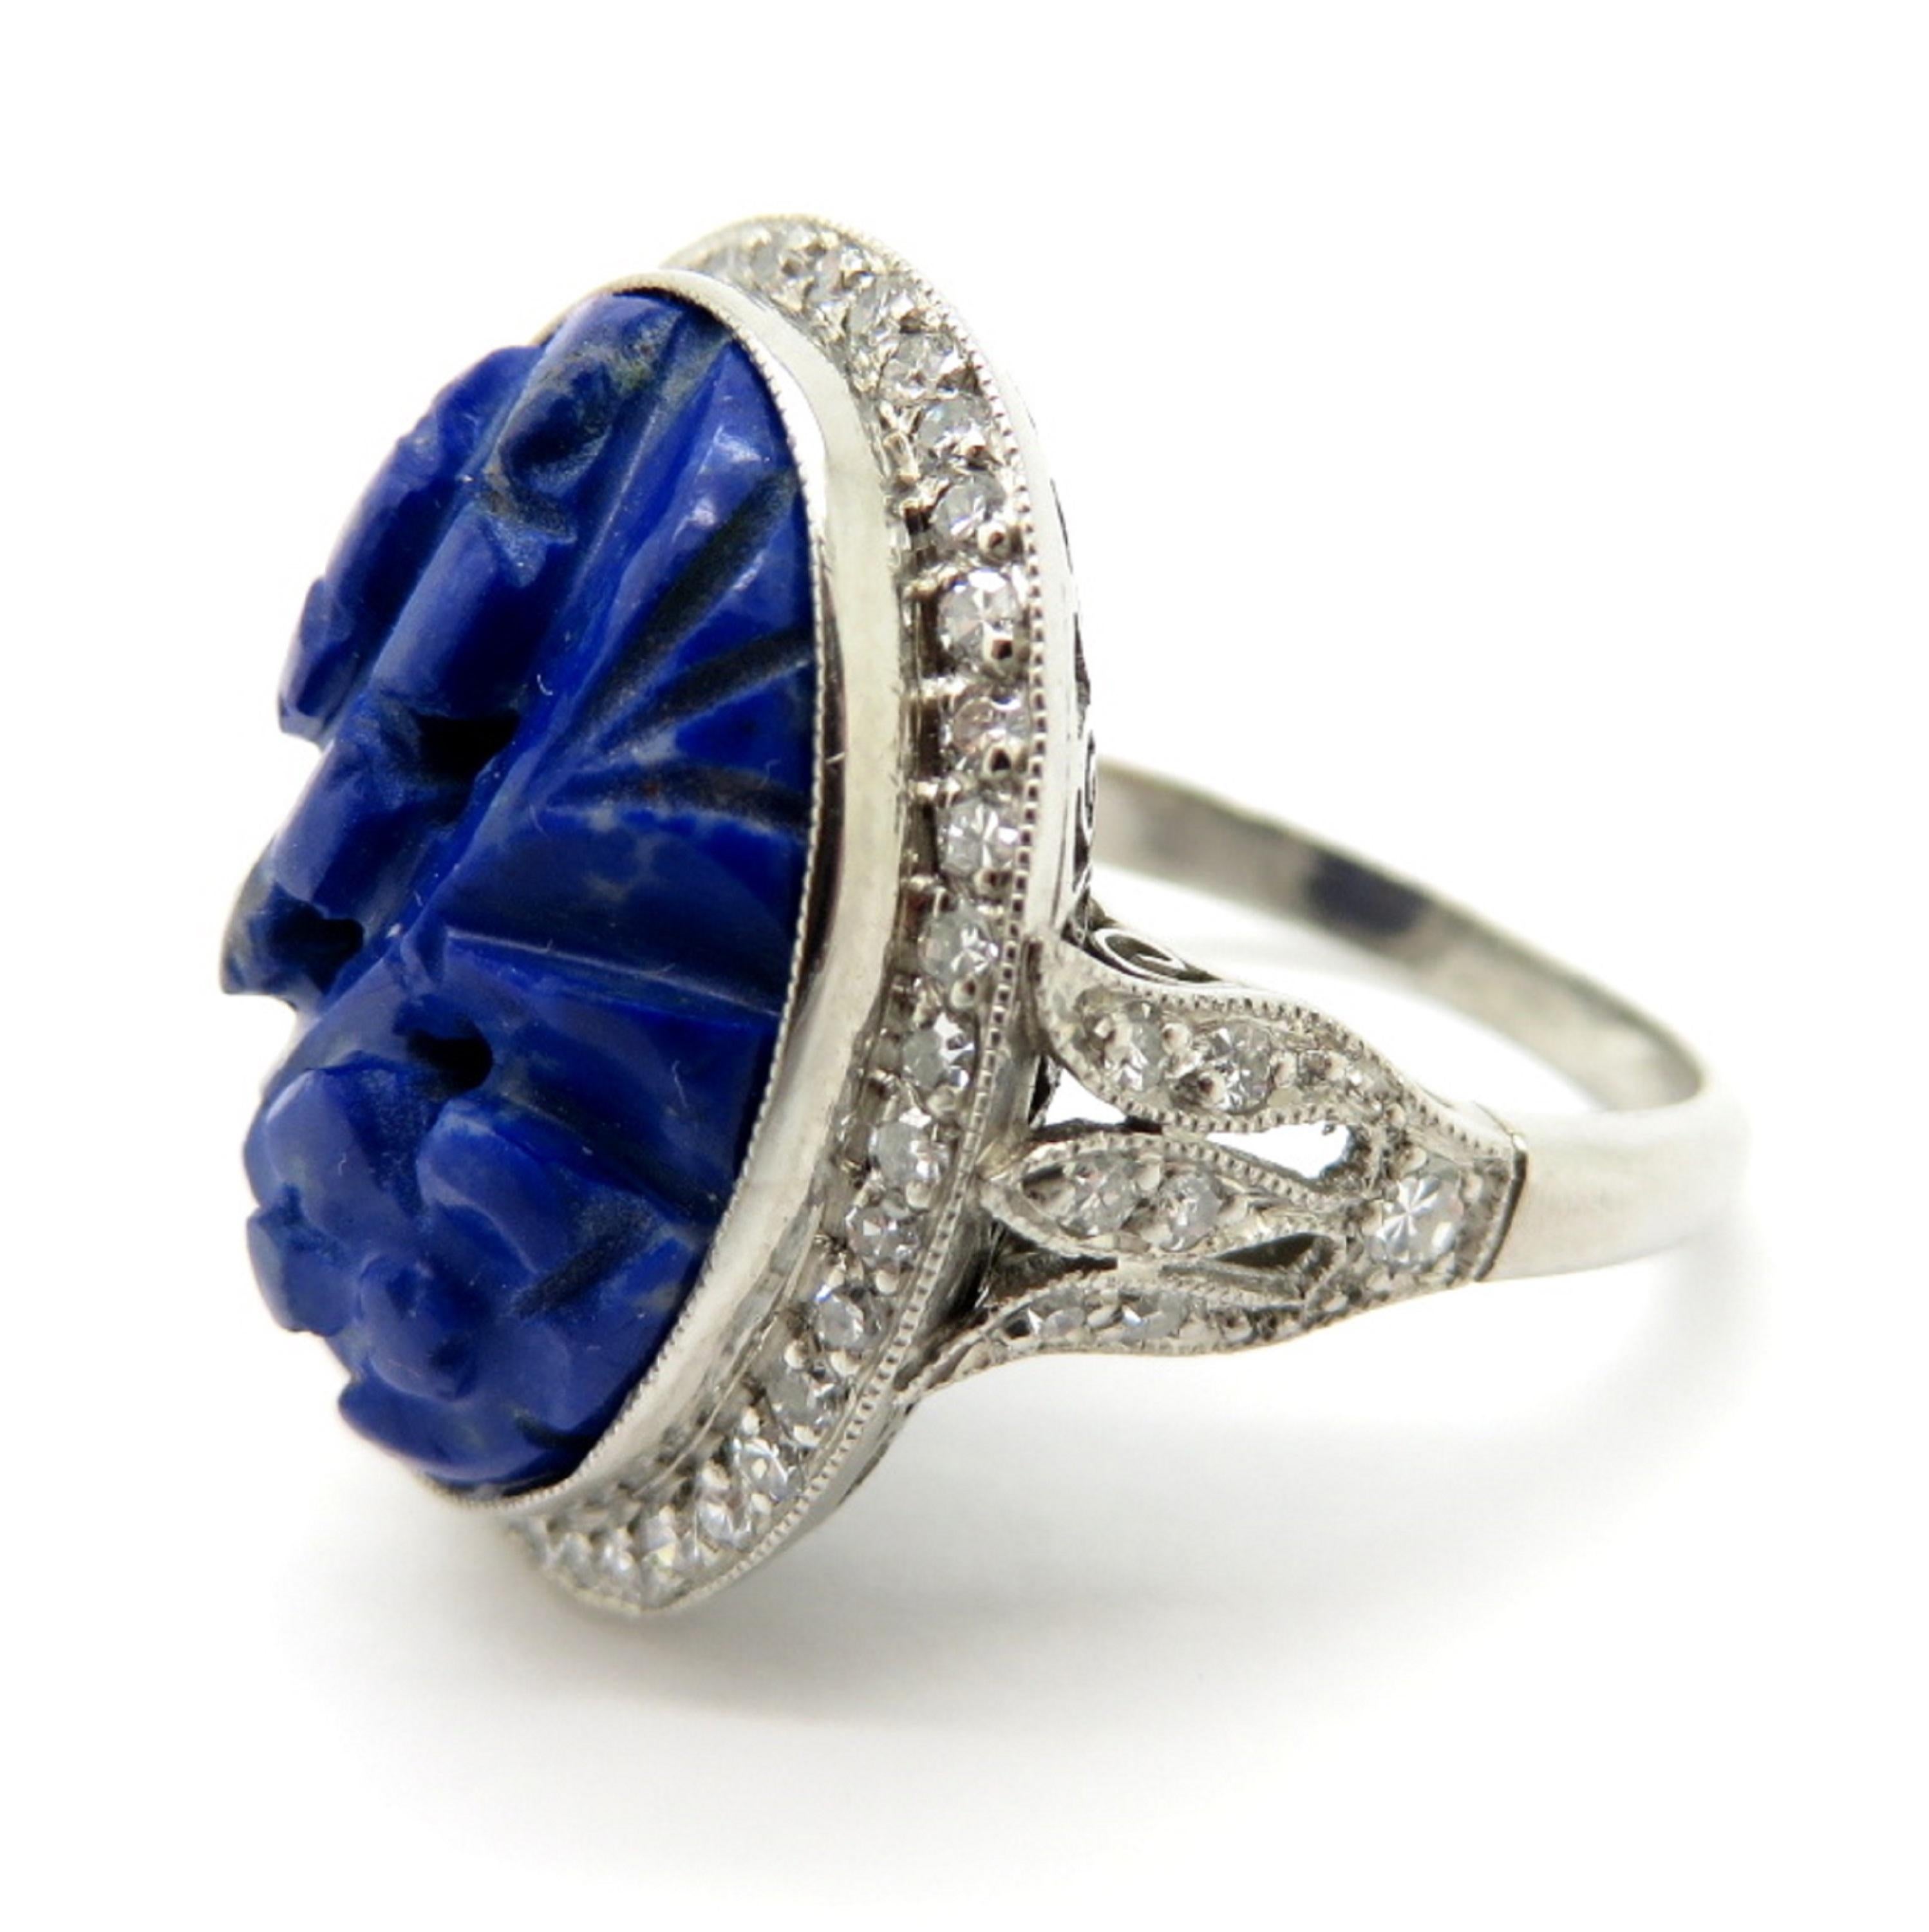 For sale is a lovely estate carved Lapis Lazuli and diamond halo ring!
Showcasing one (1) oval shaped Lapis Lazuli carved in a beautiful floral motif.
Surrounding the lapis lazuli in a halo style are (53) Single Cut diamonds, with various